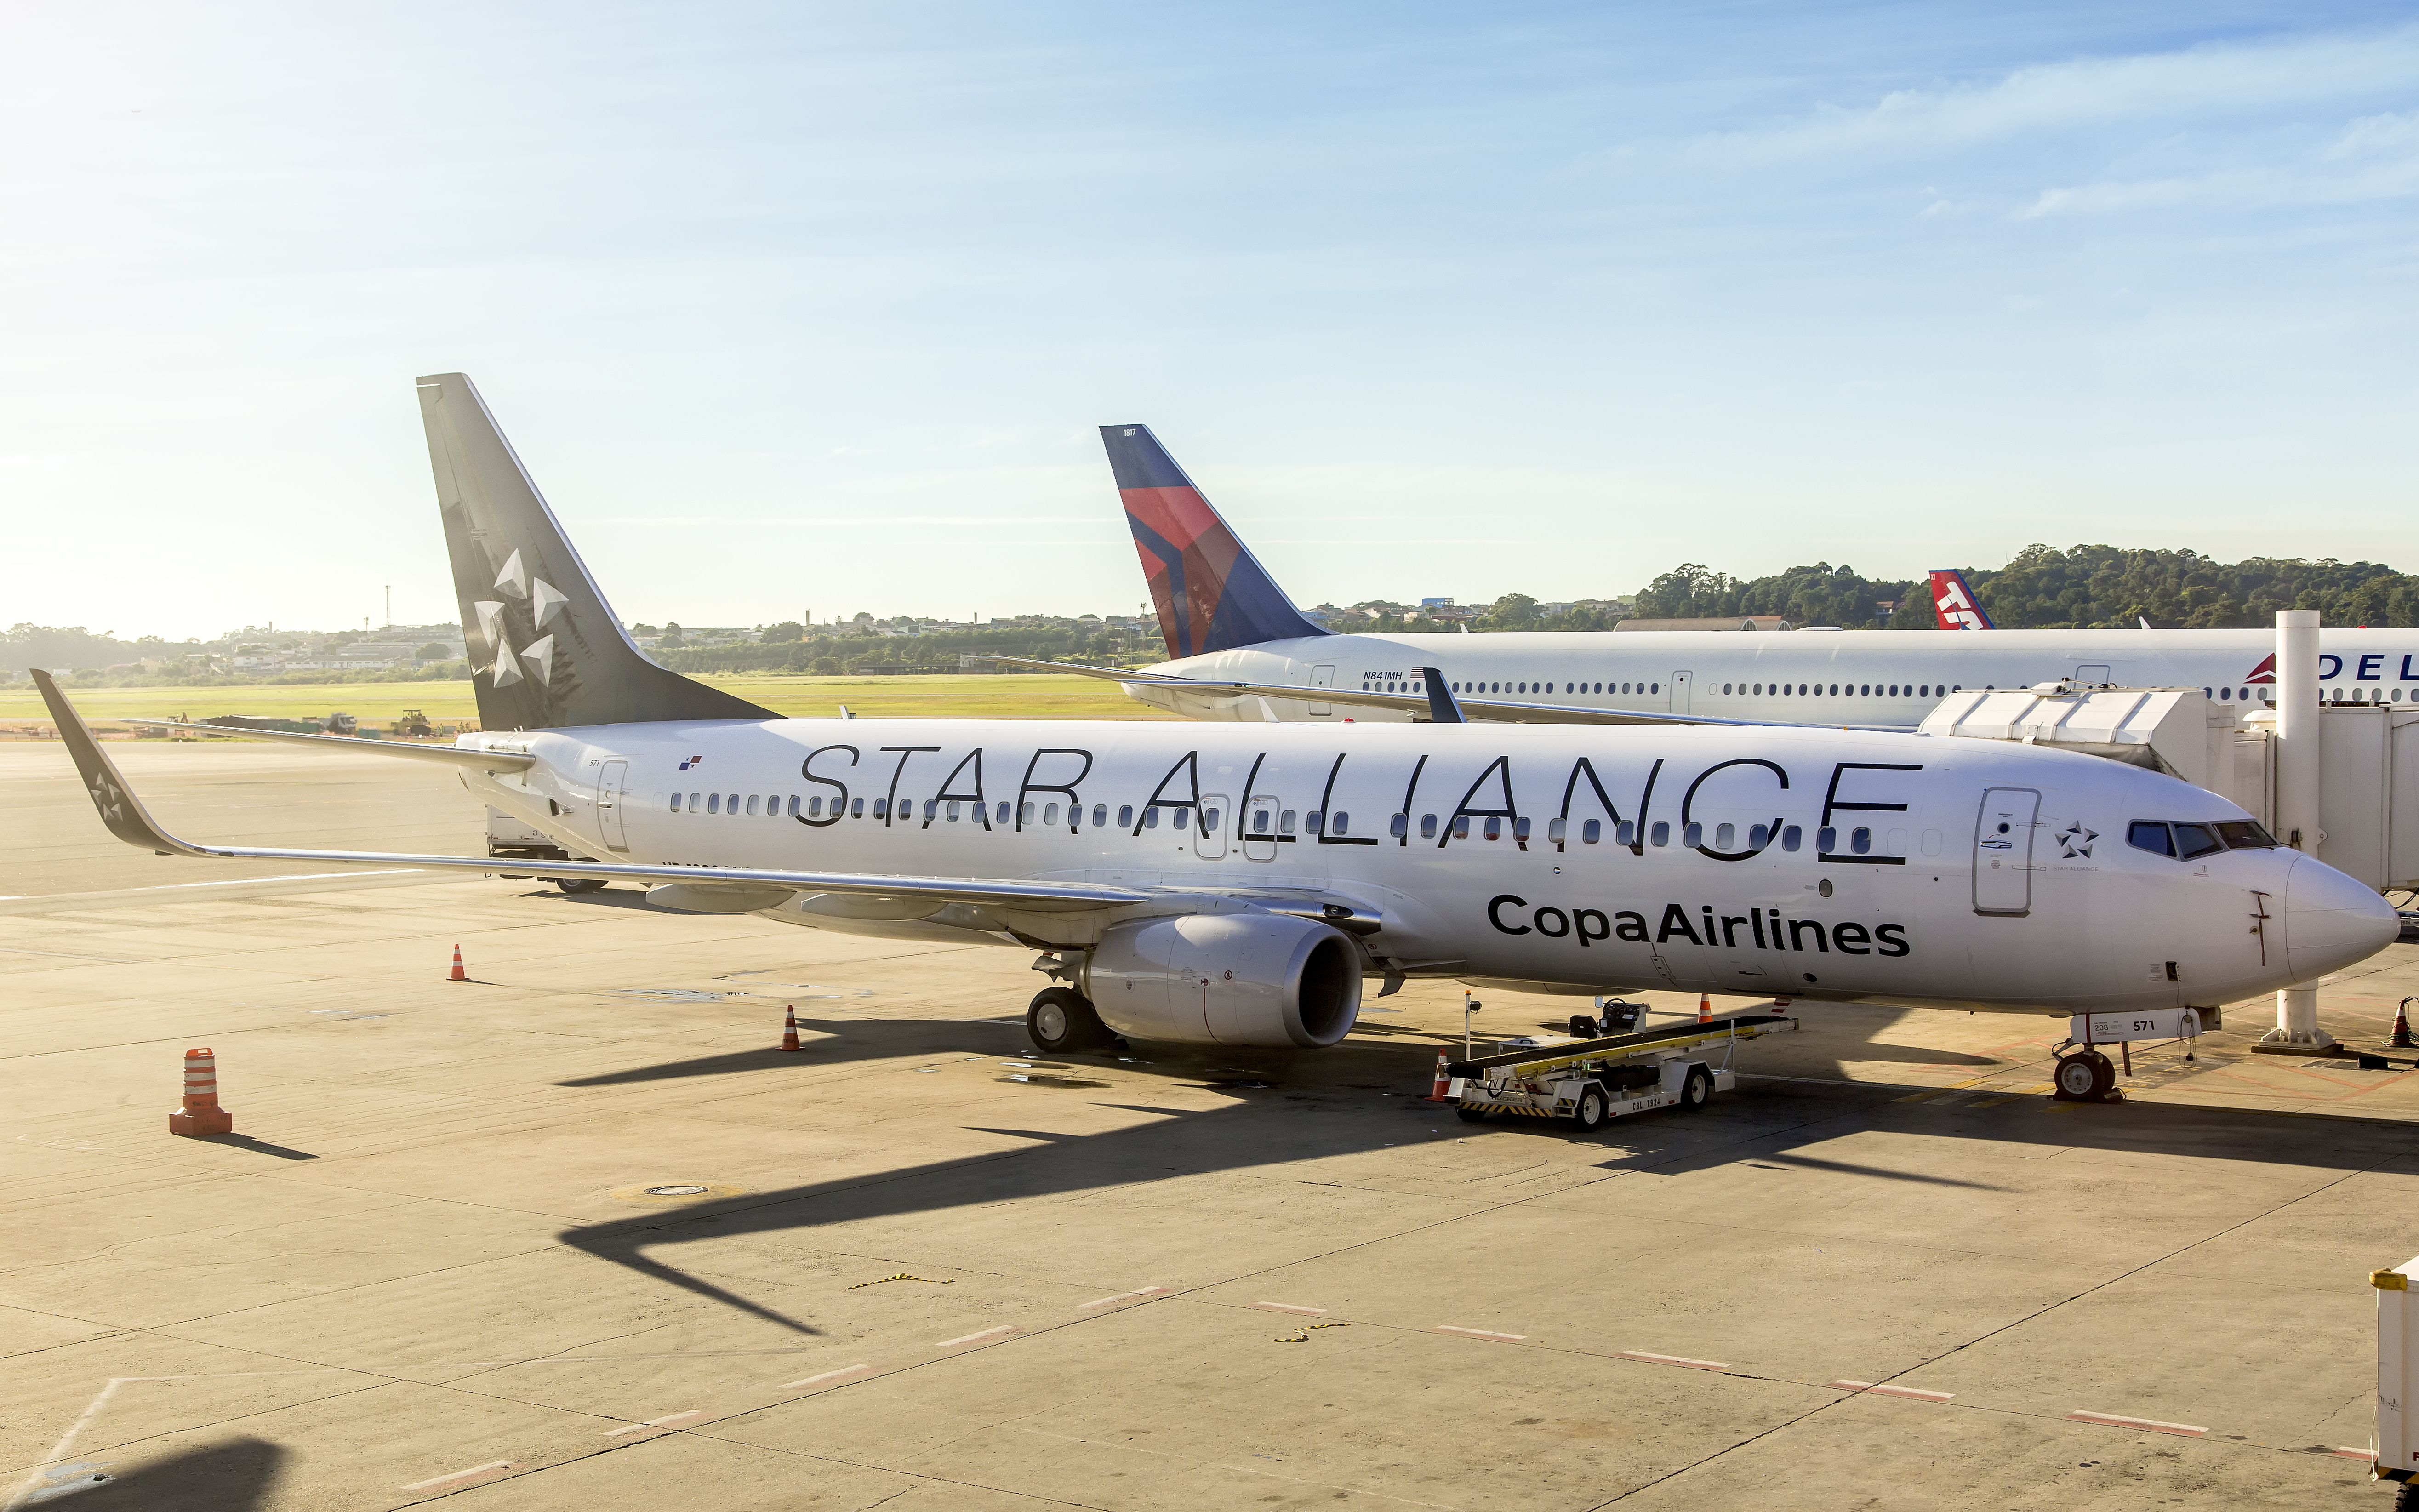 A Boeing 737-800 of Copa Airlines with Star Alliance livery parked on an airport apron.